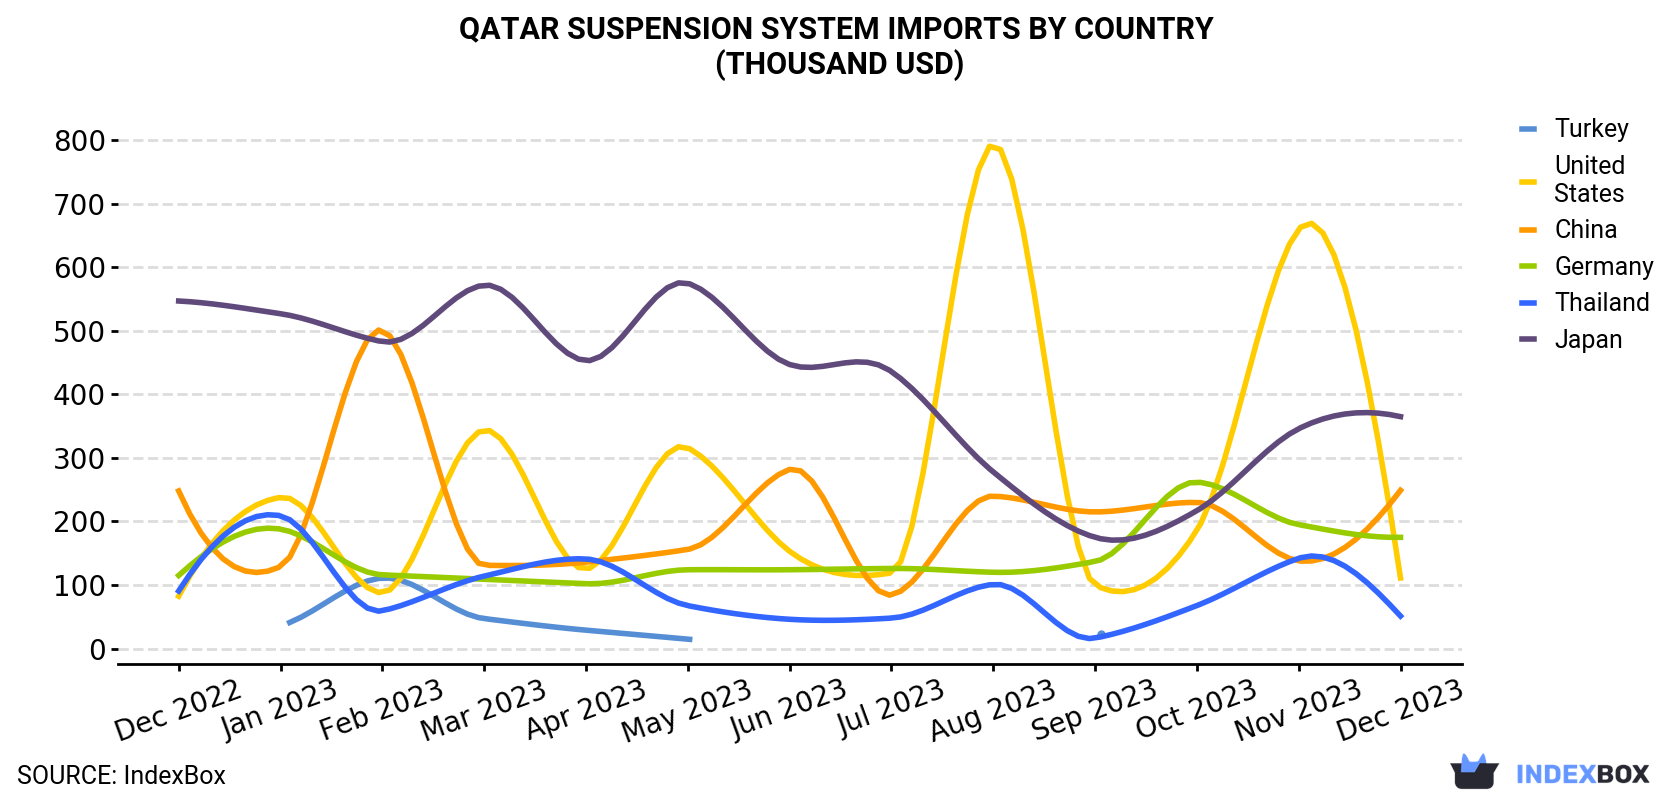 Qatar Suspension System Imports By Country (Thousand USD)